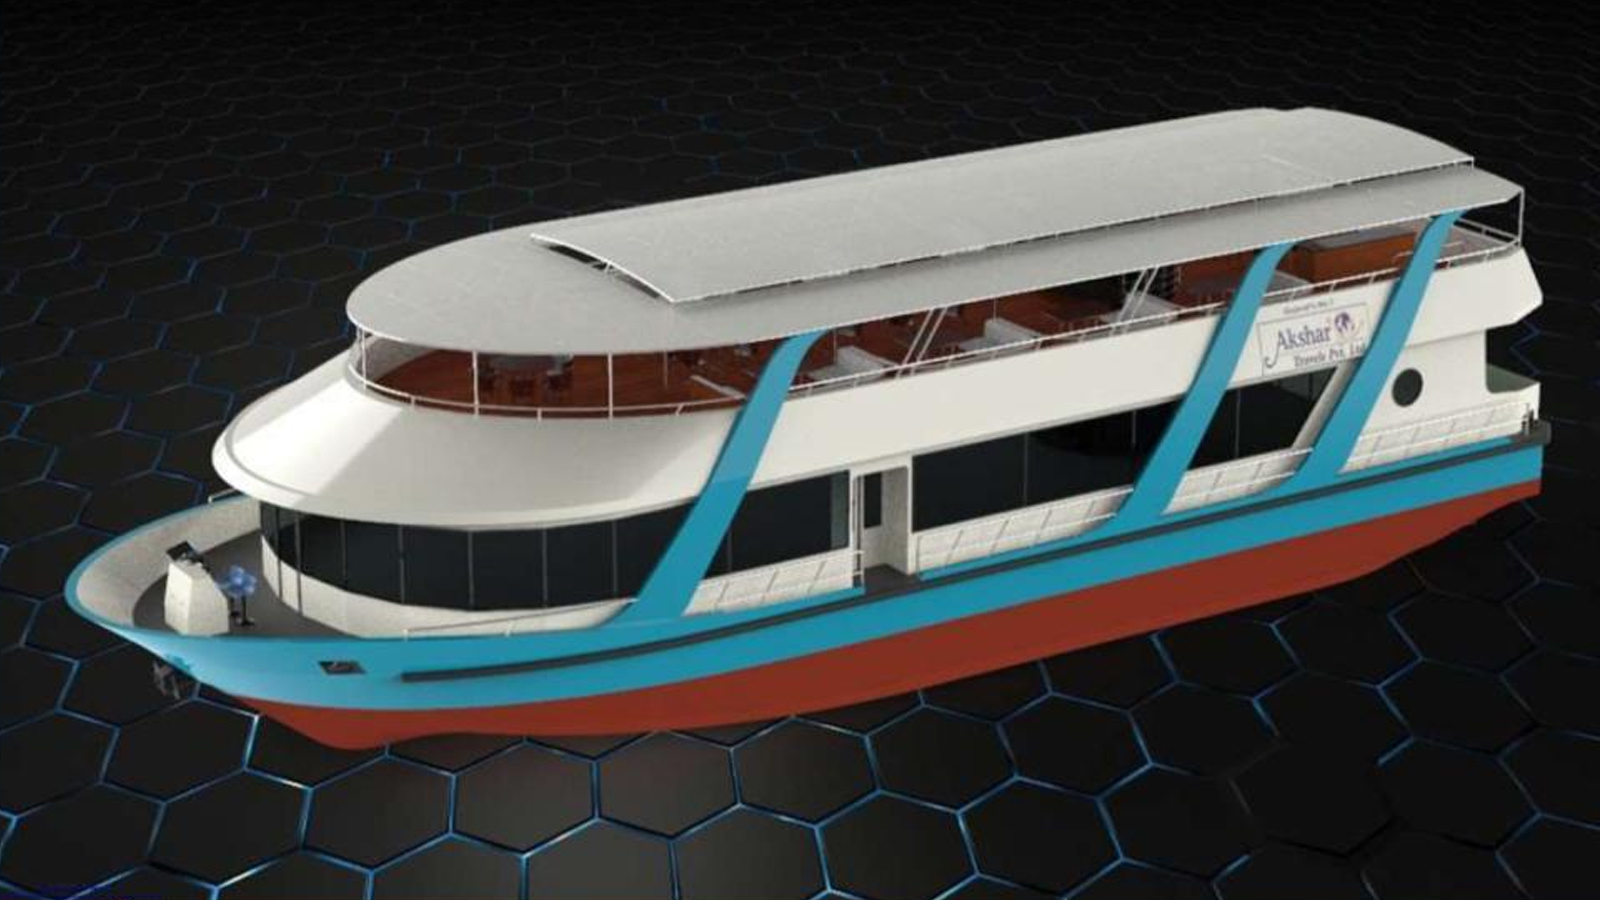 Cruise will start in Riverfront